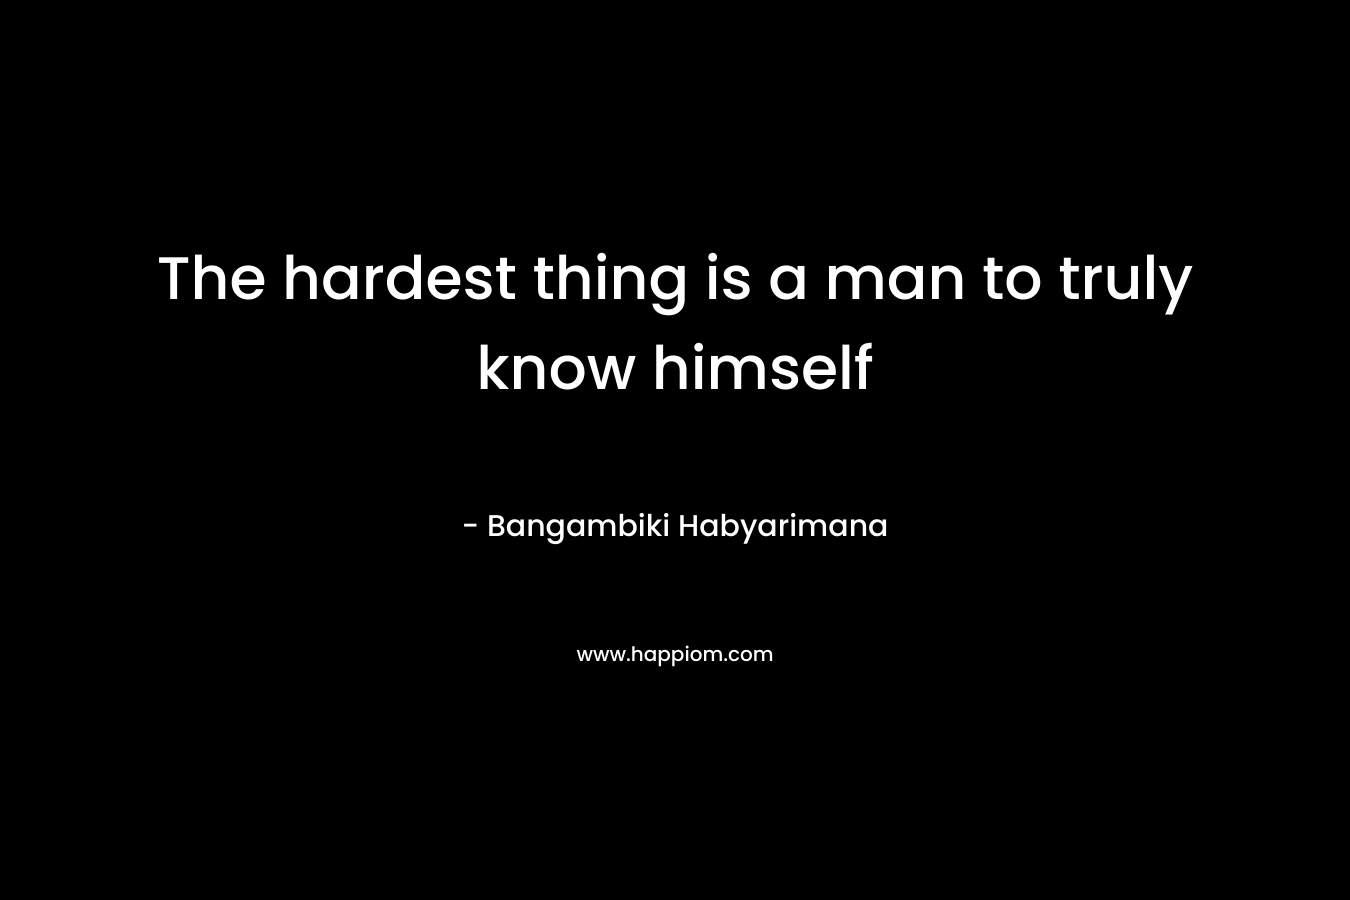 The hardest thing is a man to truly know himself